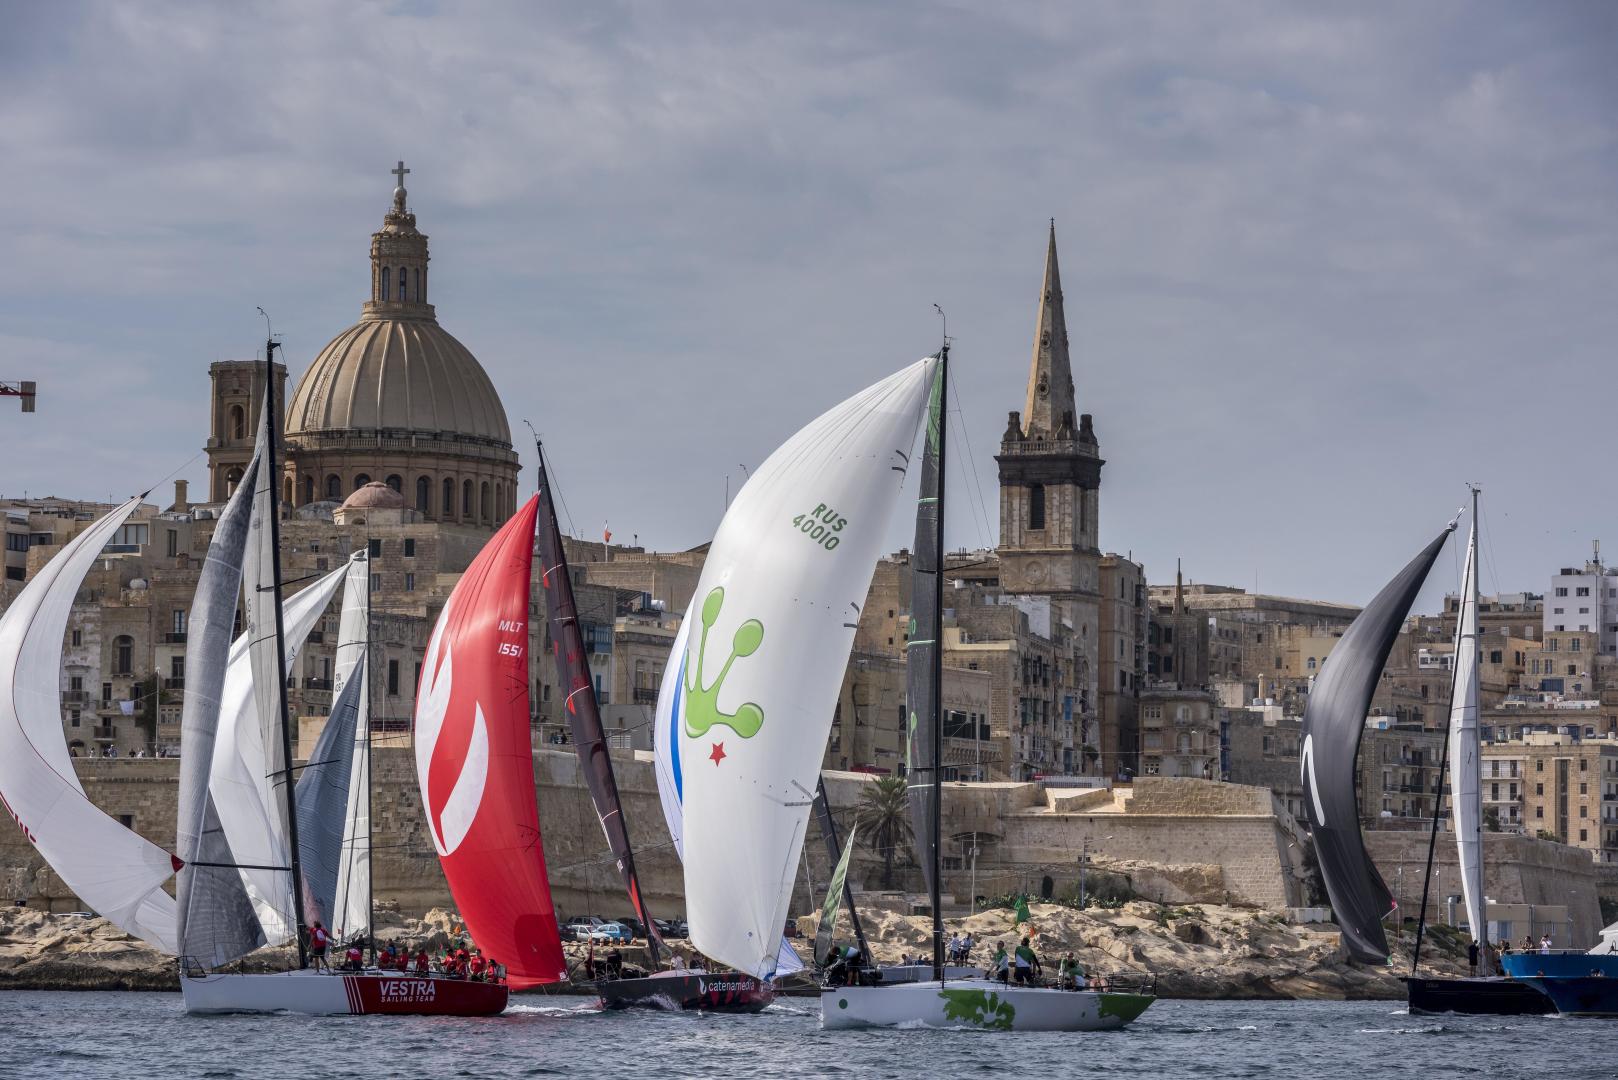 Weather does not dampen spirits ahead of Yachting Malta Coastal Race